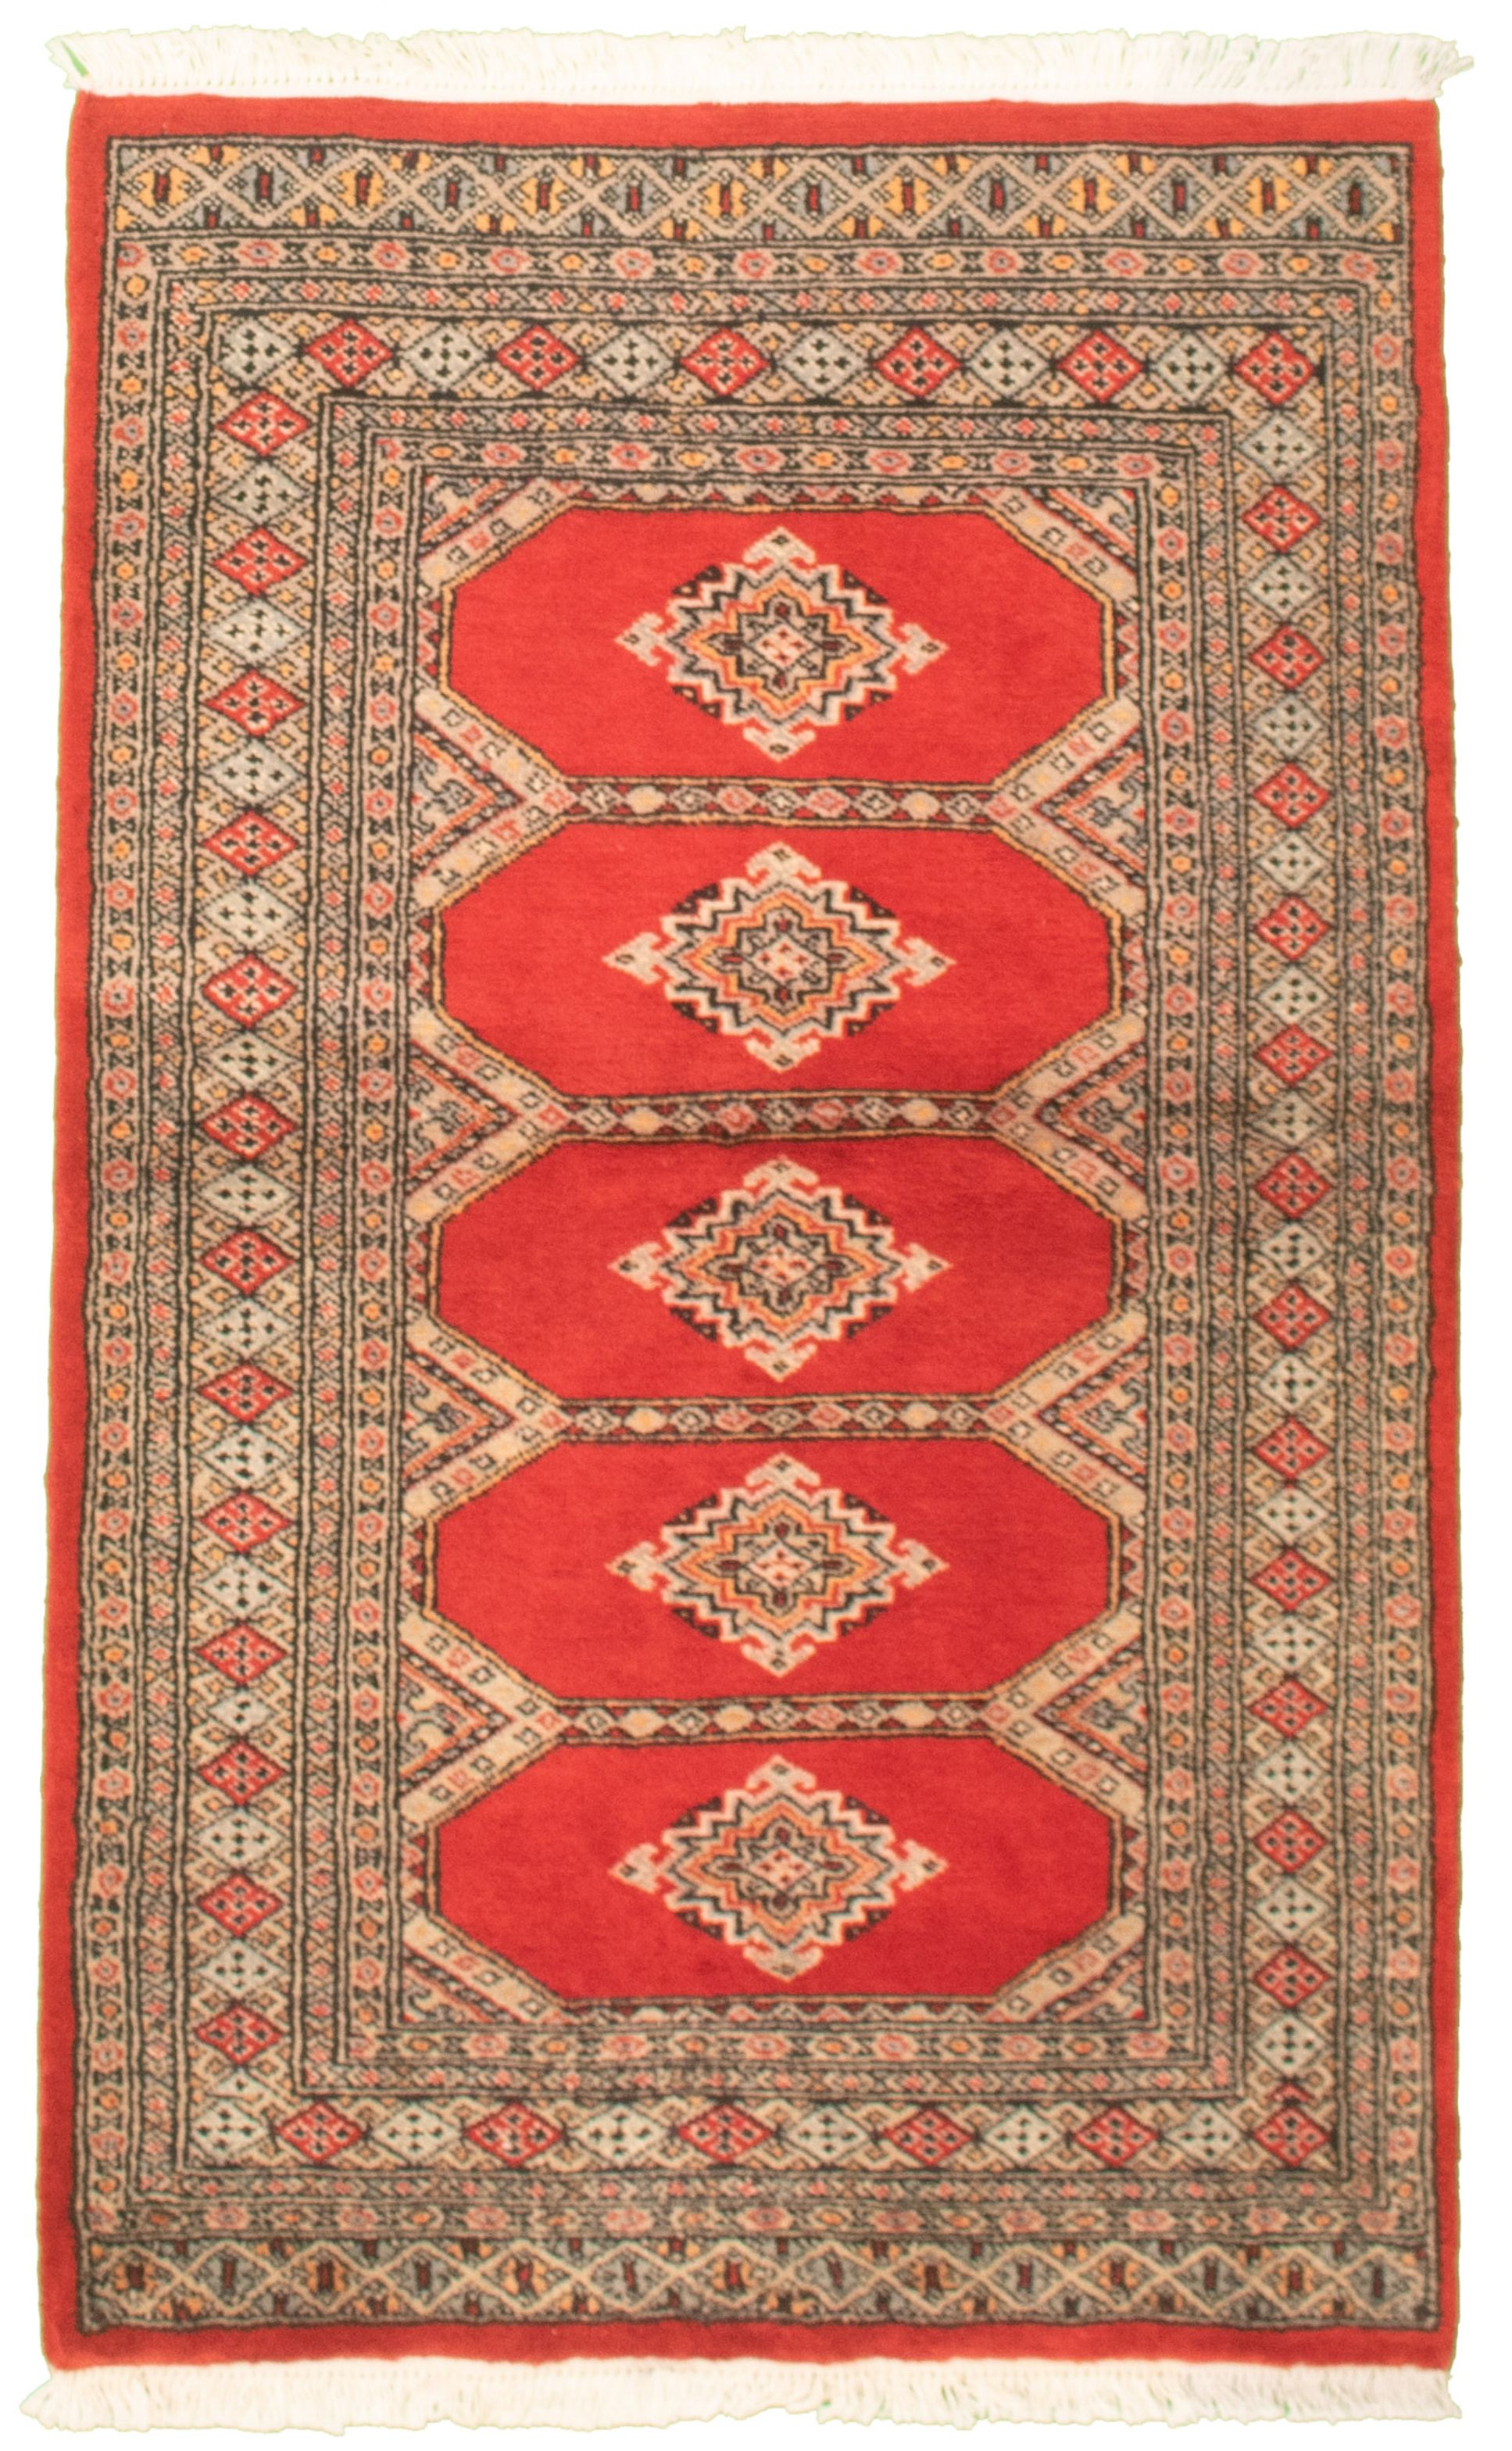 Hand-knotted Finest Peshawar Bokhara Red Wool Rug 3'0" x 5'2"  Size: 3'0" x 5'2"  